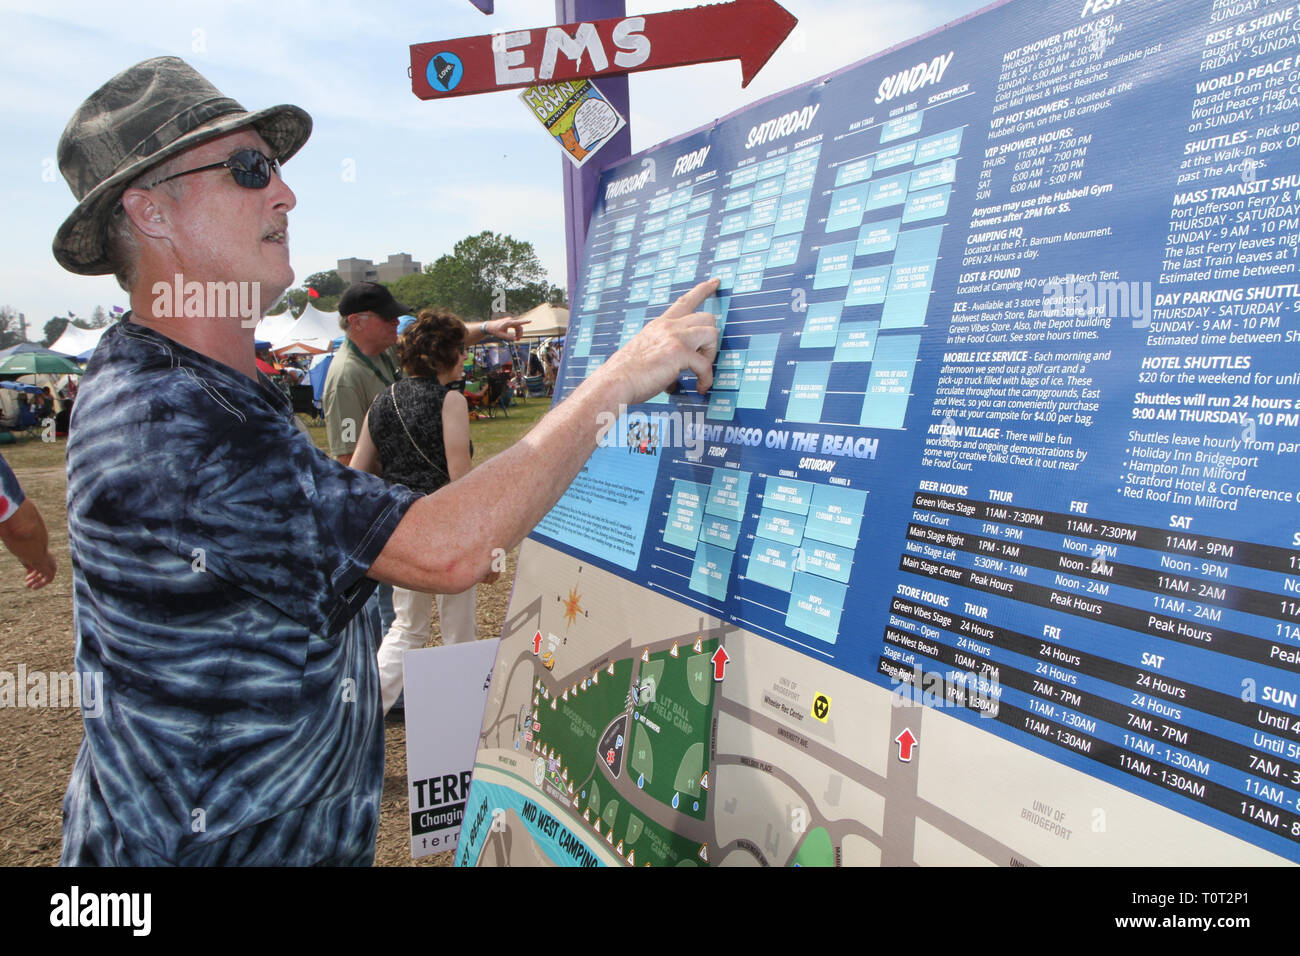 A concert goer is shown checking the Band Schedule Board at an outdoor summer music festival. Stock Photo